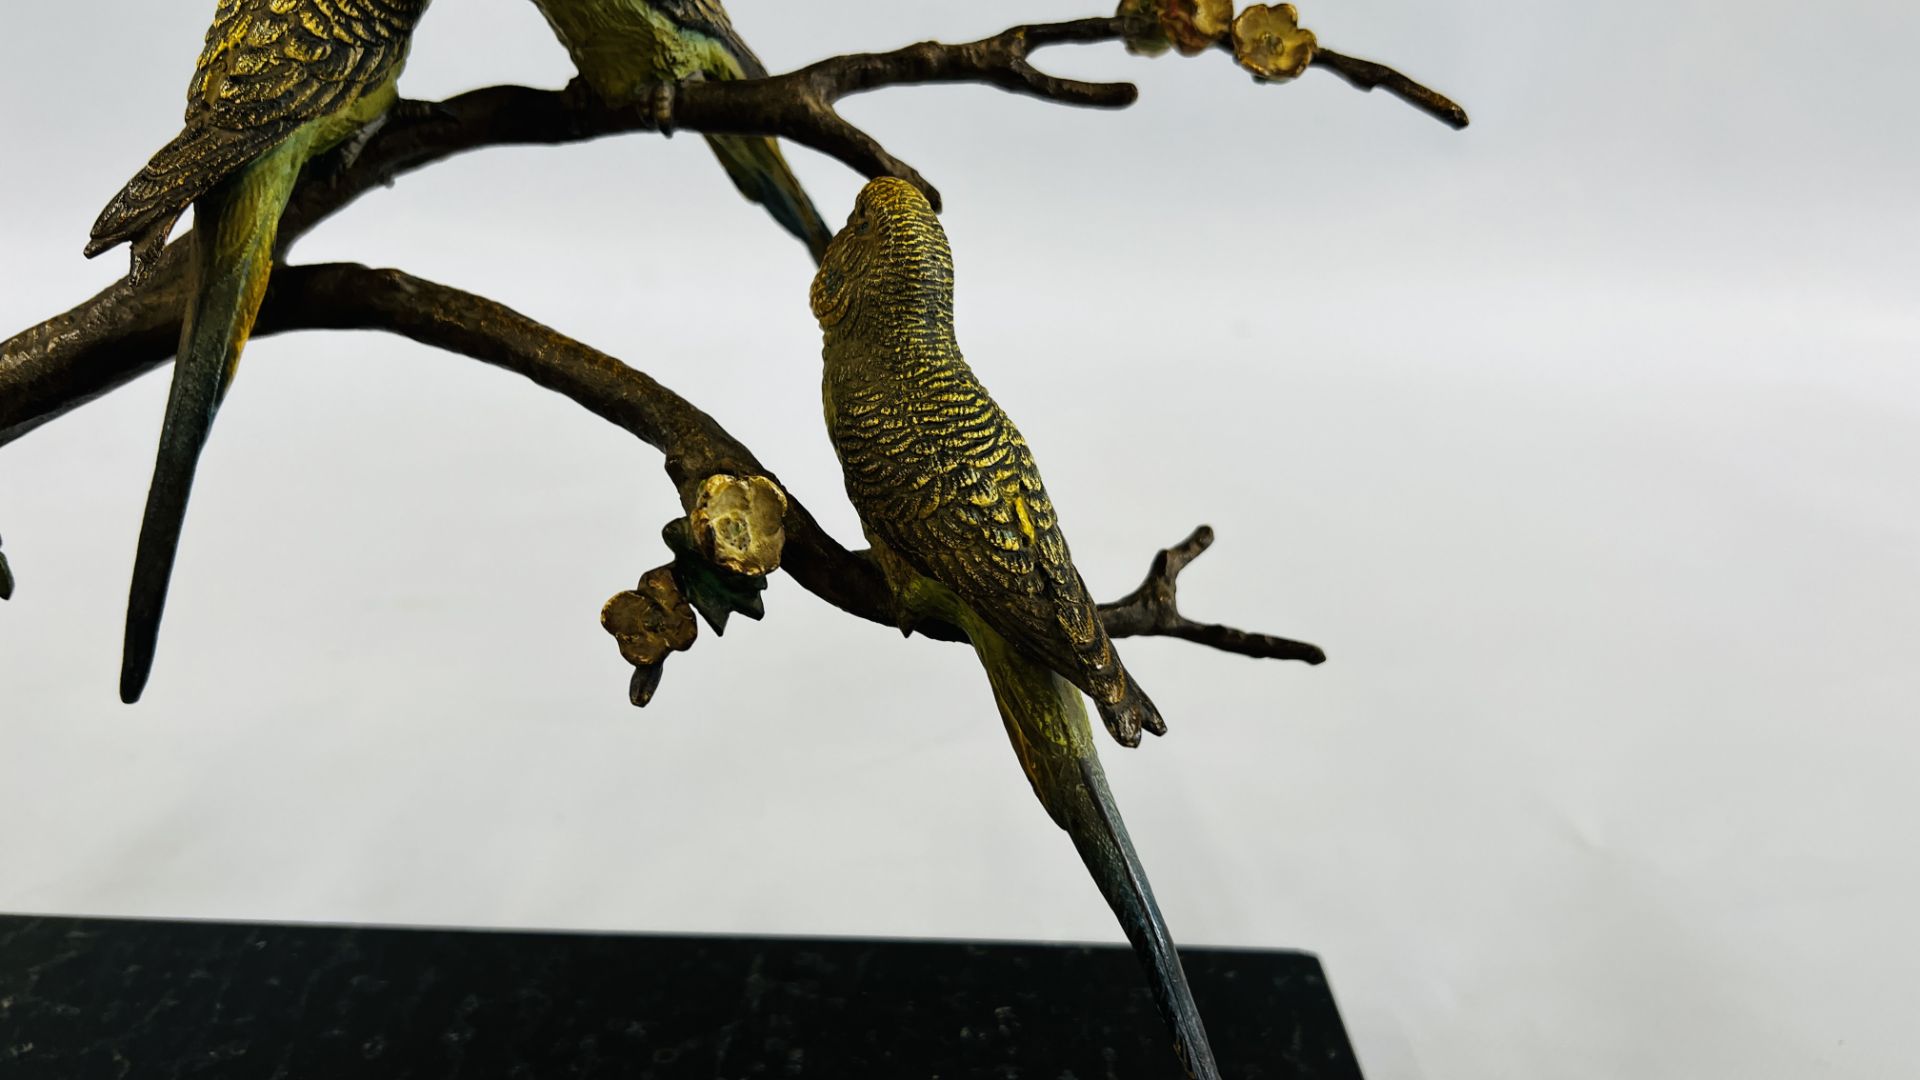 COLD PAINTED BRONZE STUDY OF THREE BUDGERIGARS ON A BLOSSOM BRANCH ON A HARD STONE BASE - L 33CM X - Image 5 of 8